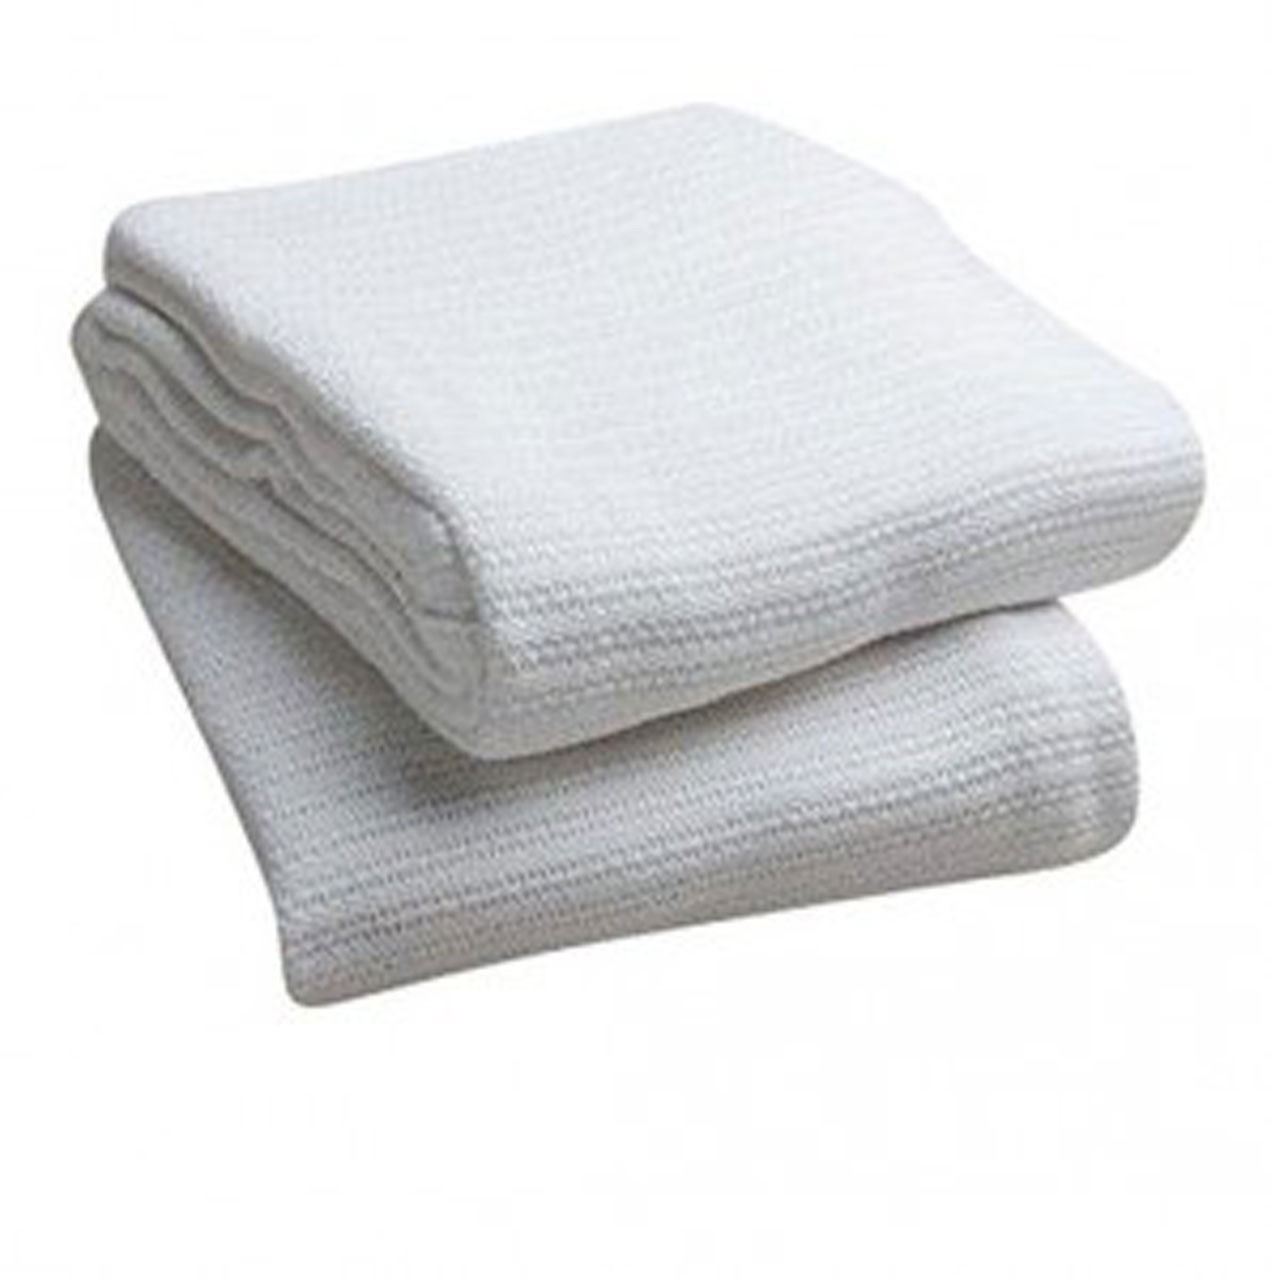 What's the recommended choice for an open weave blanket like the White Open Weave Thermal Blanket?